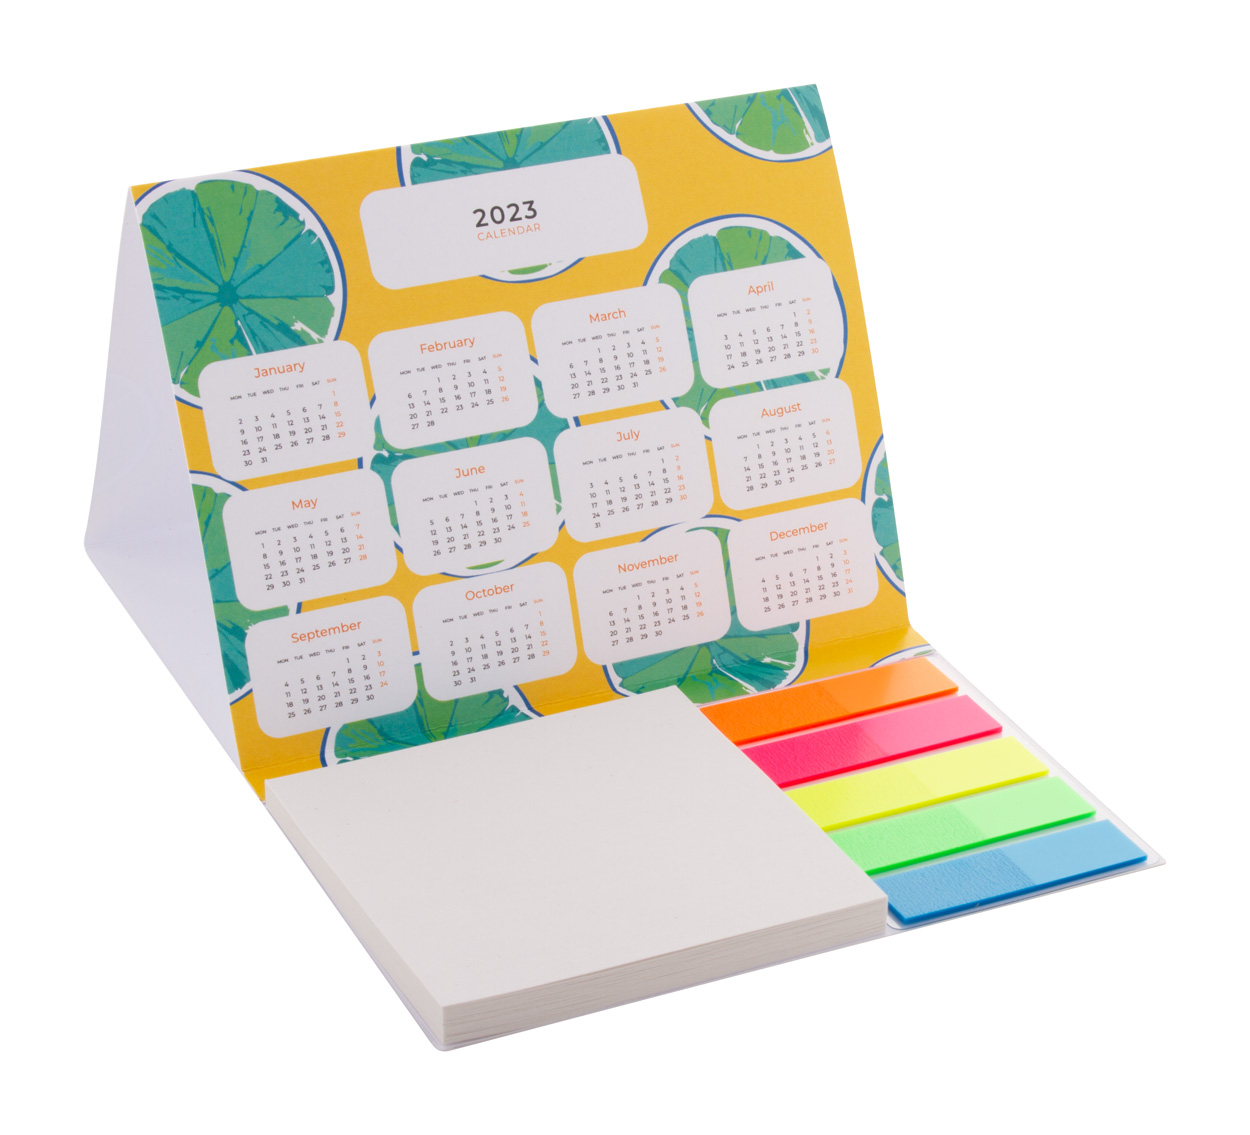 CreaStick Combo Date calendar with self-adhesive tickets to order - white